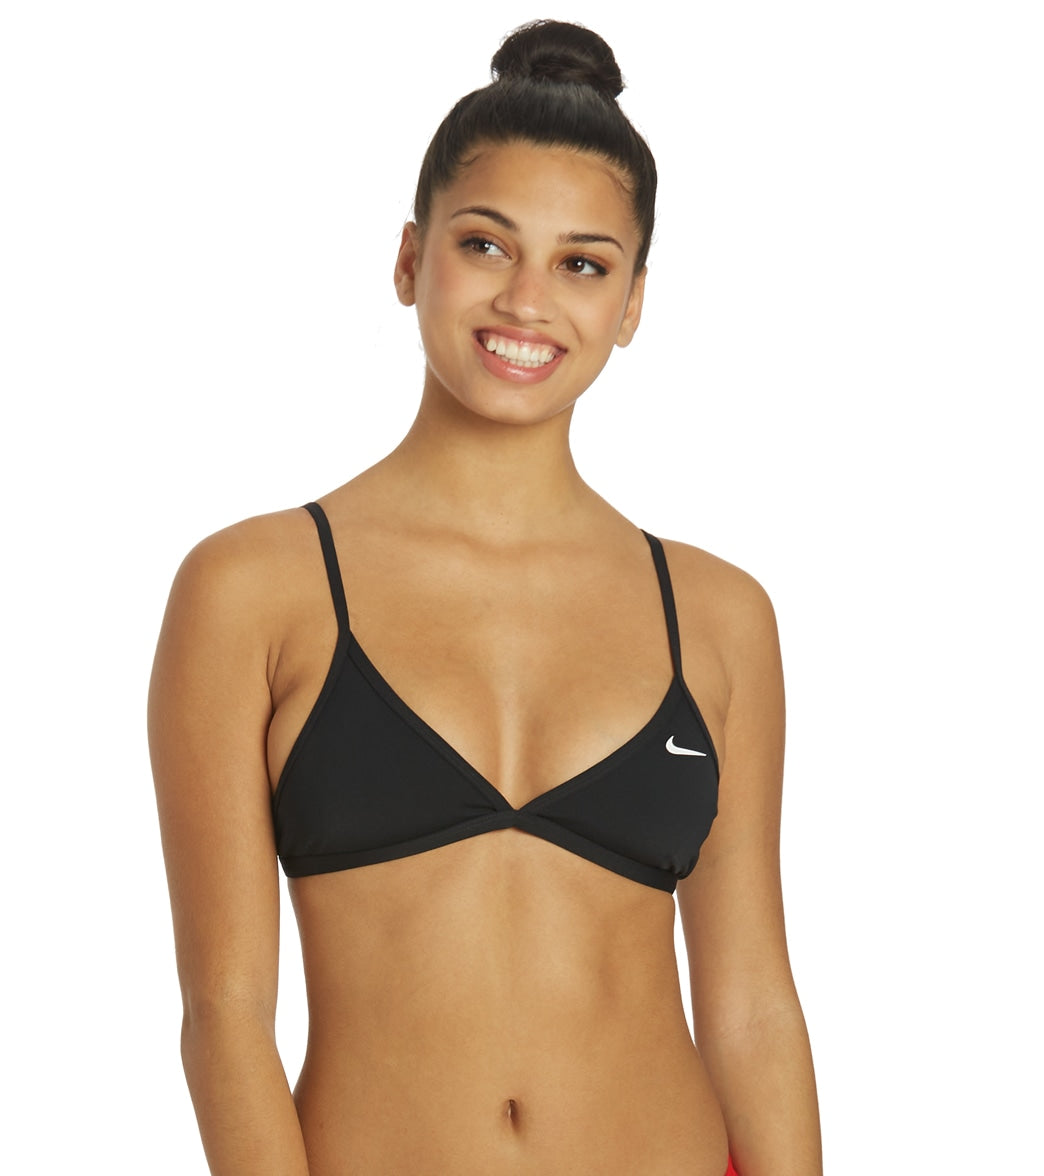 Nike Women's HydraStrong Solid Tie Back Bikini Top at SwimOutlet.com